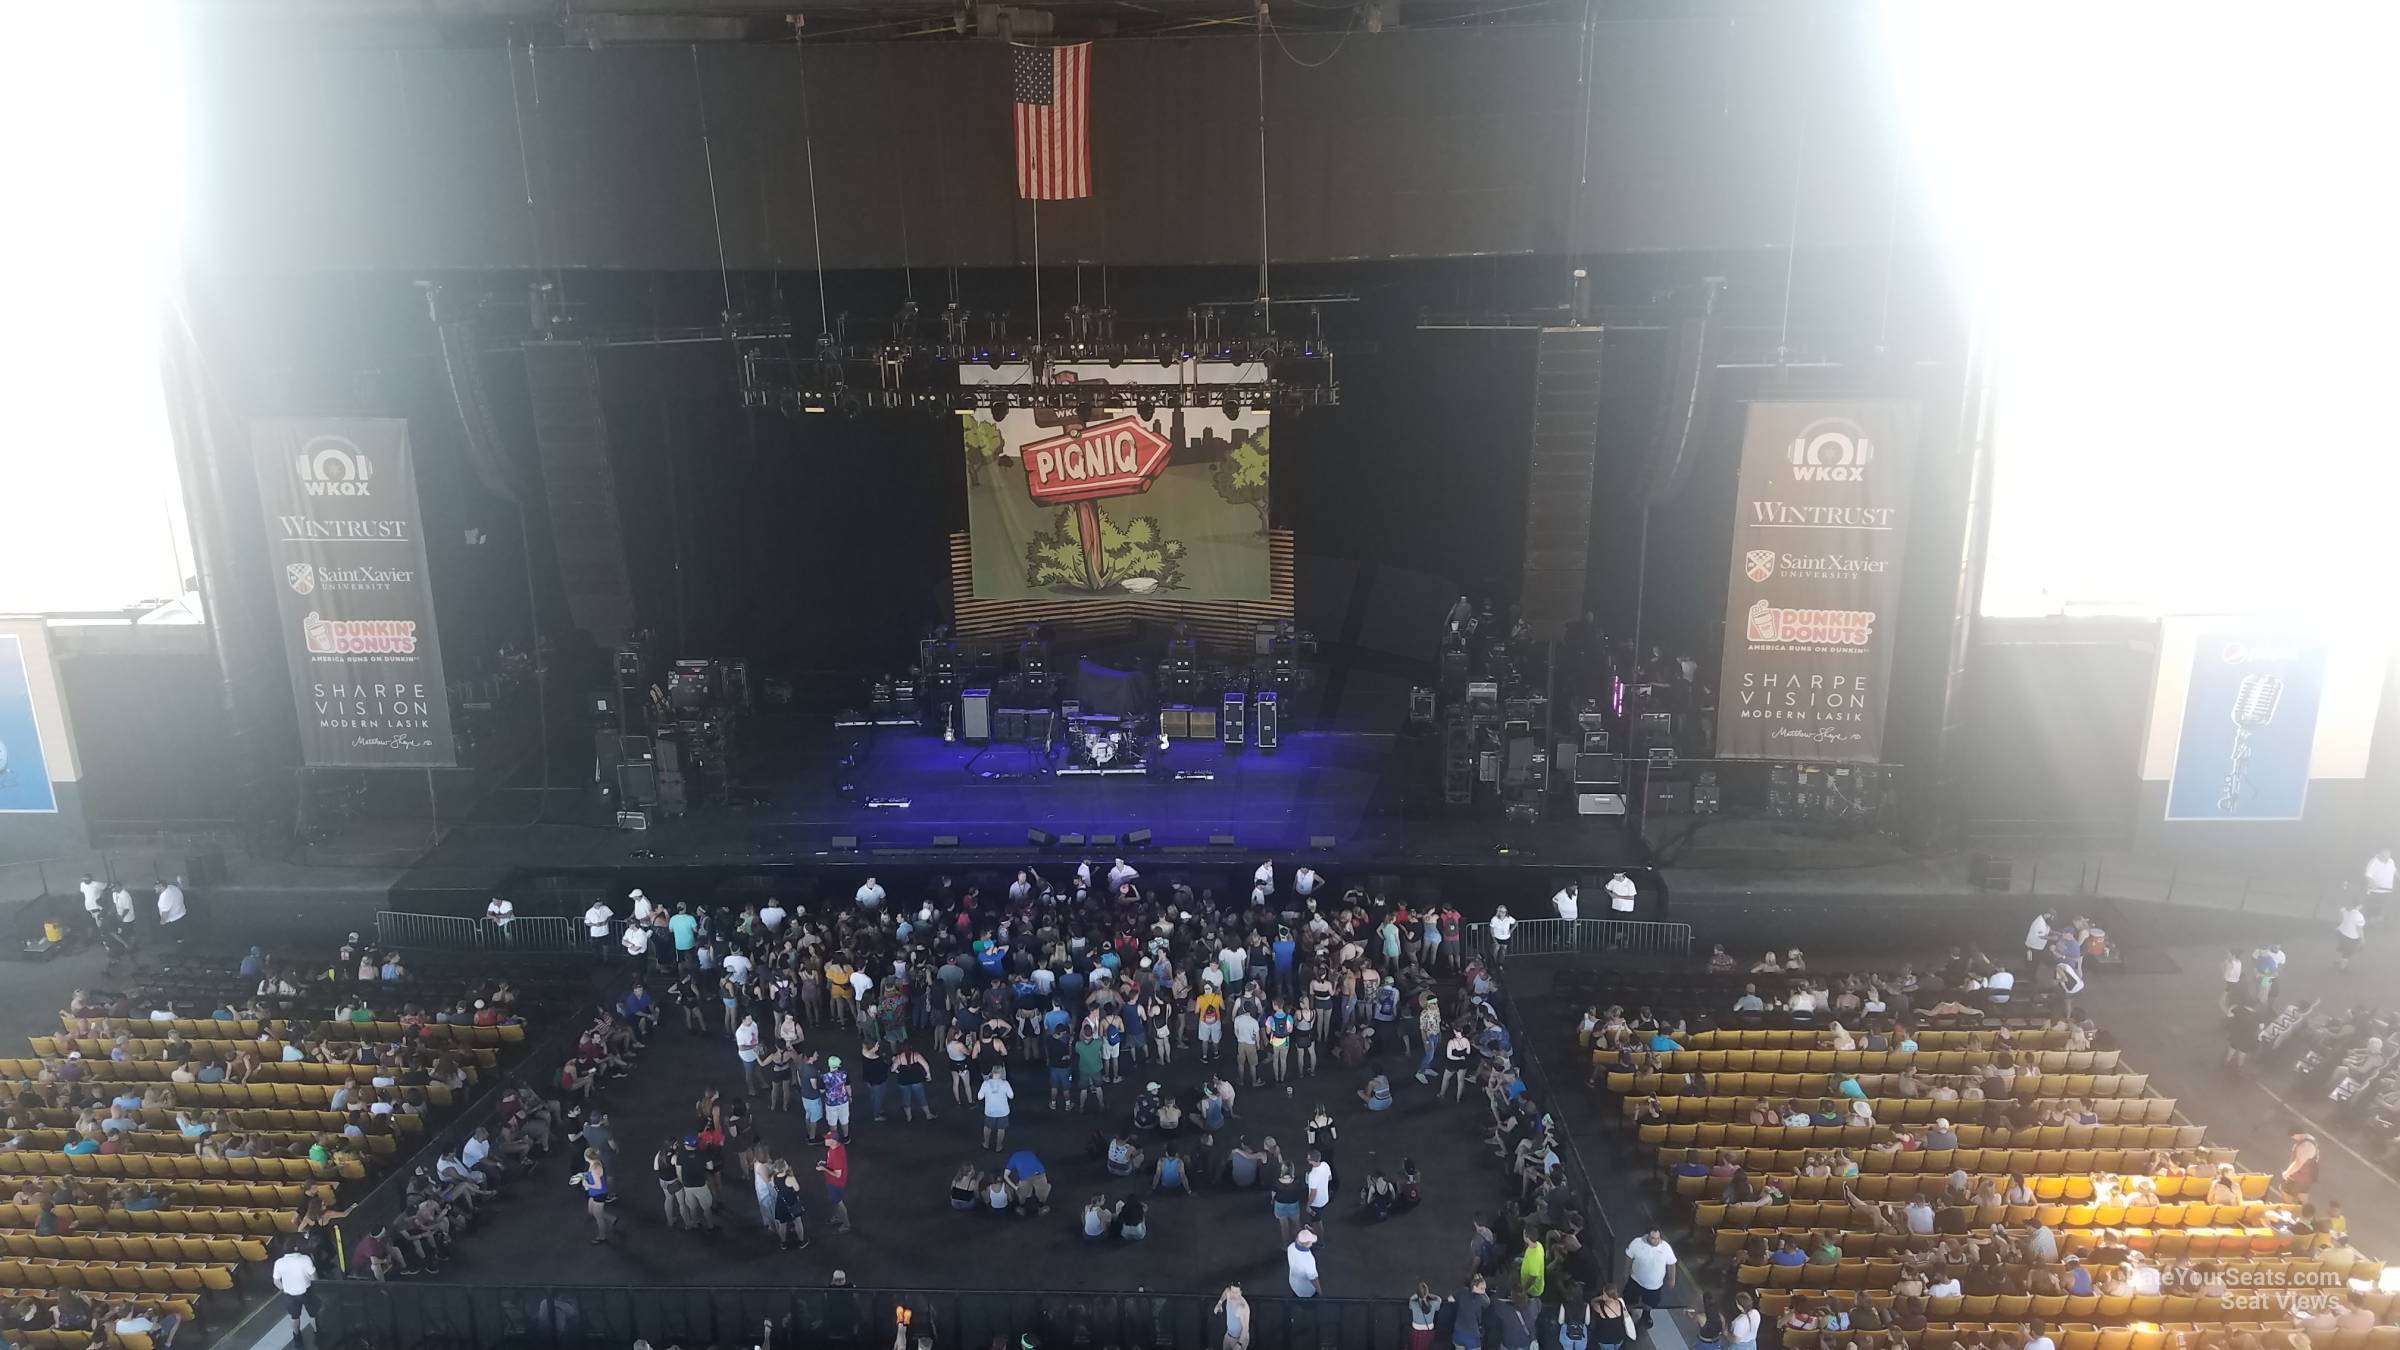 hollywood casino amphitheater chicago view from my seat